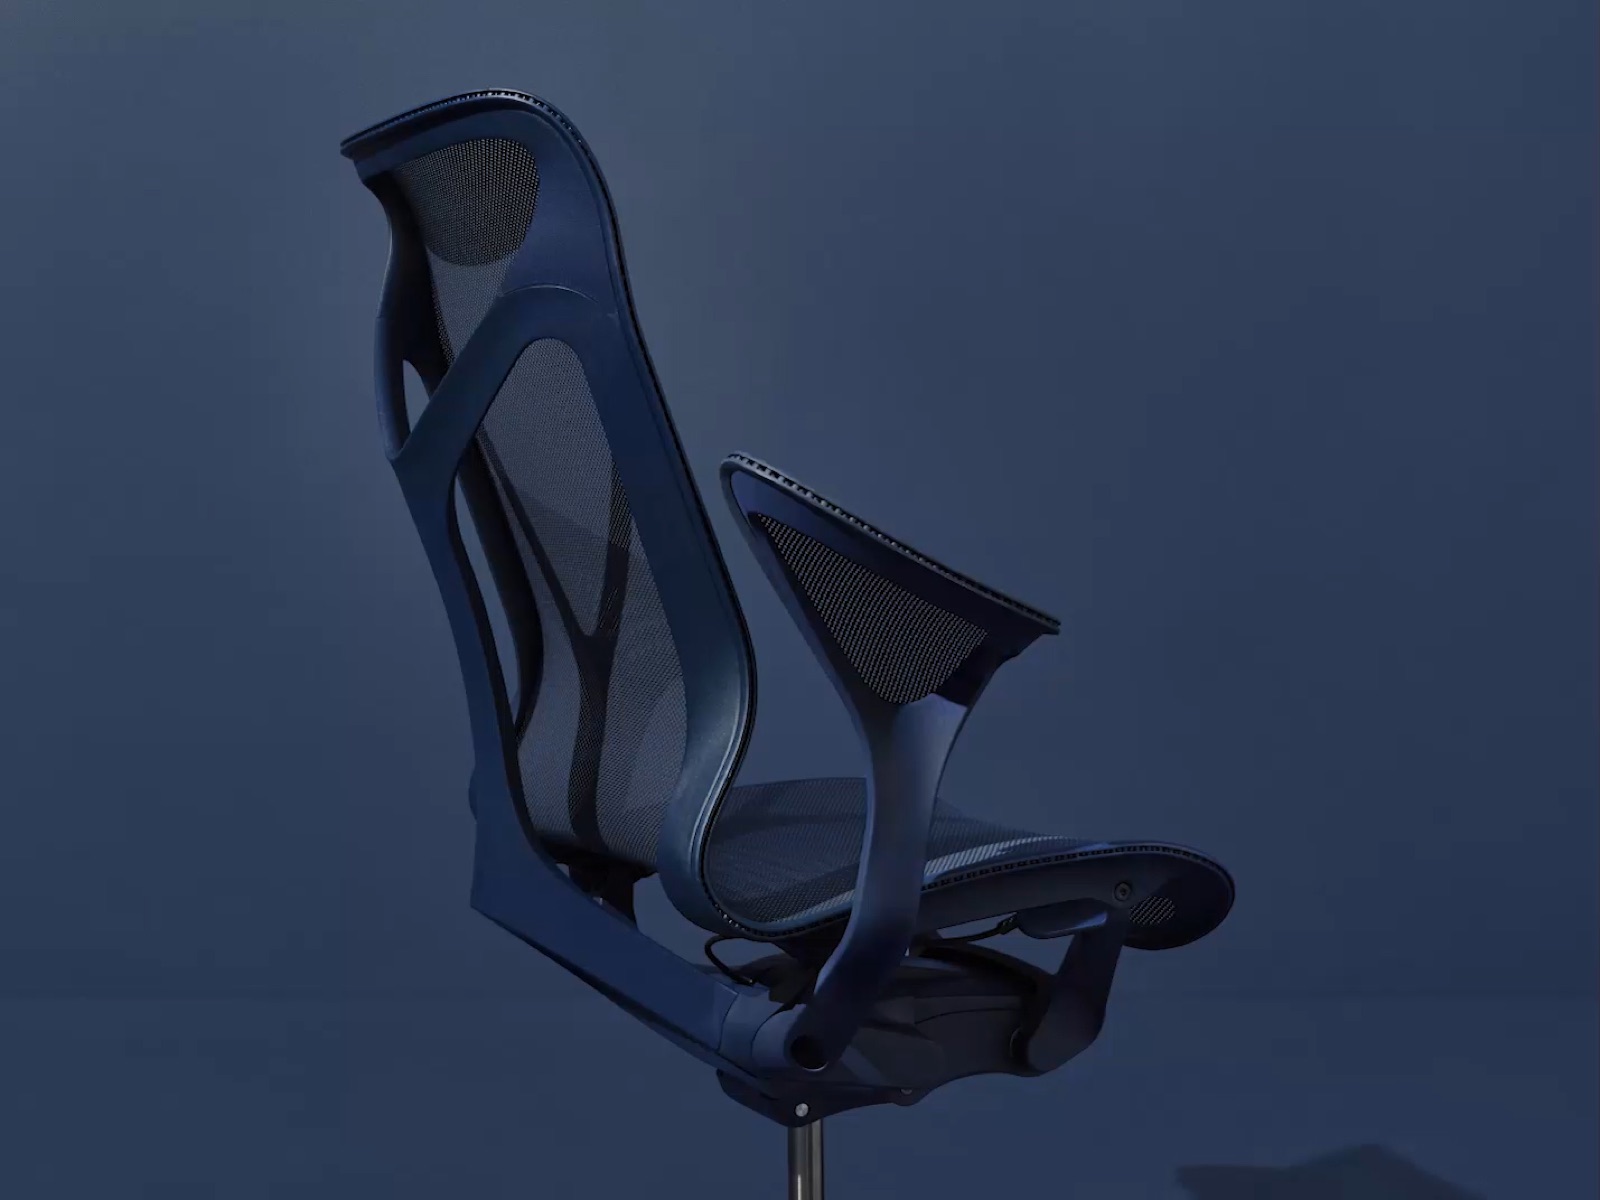 A high-back Cosm office chair with leaf arms in Nightfall dark blue, viewed from an angle.